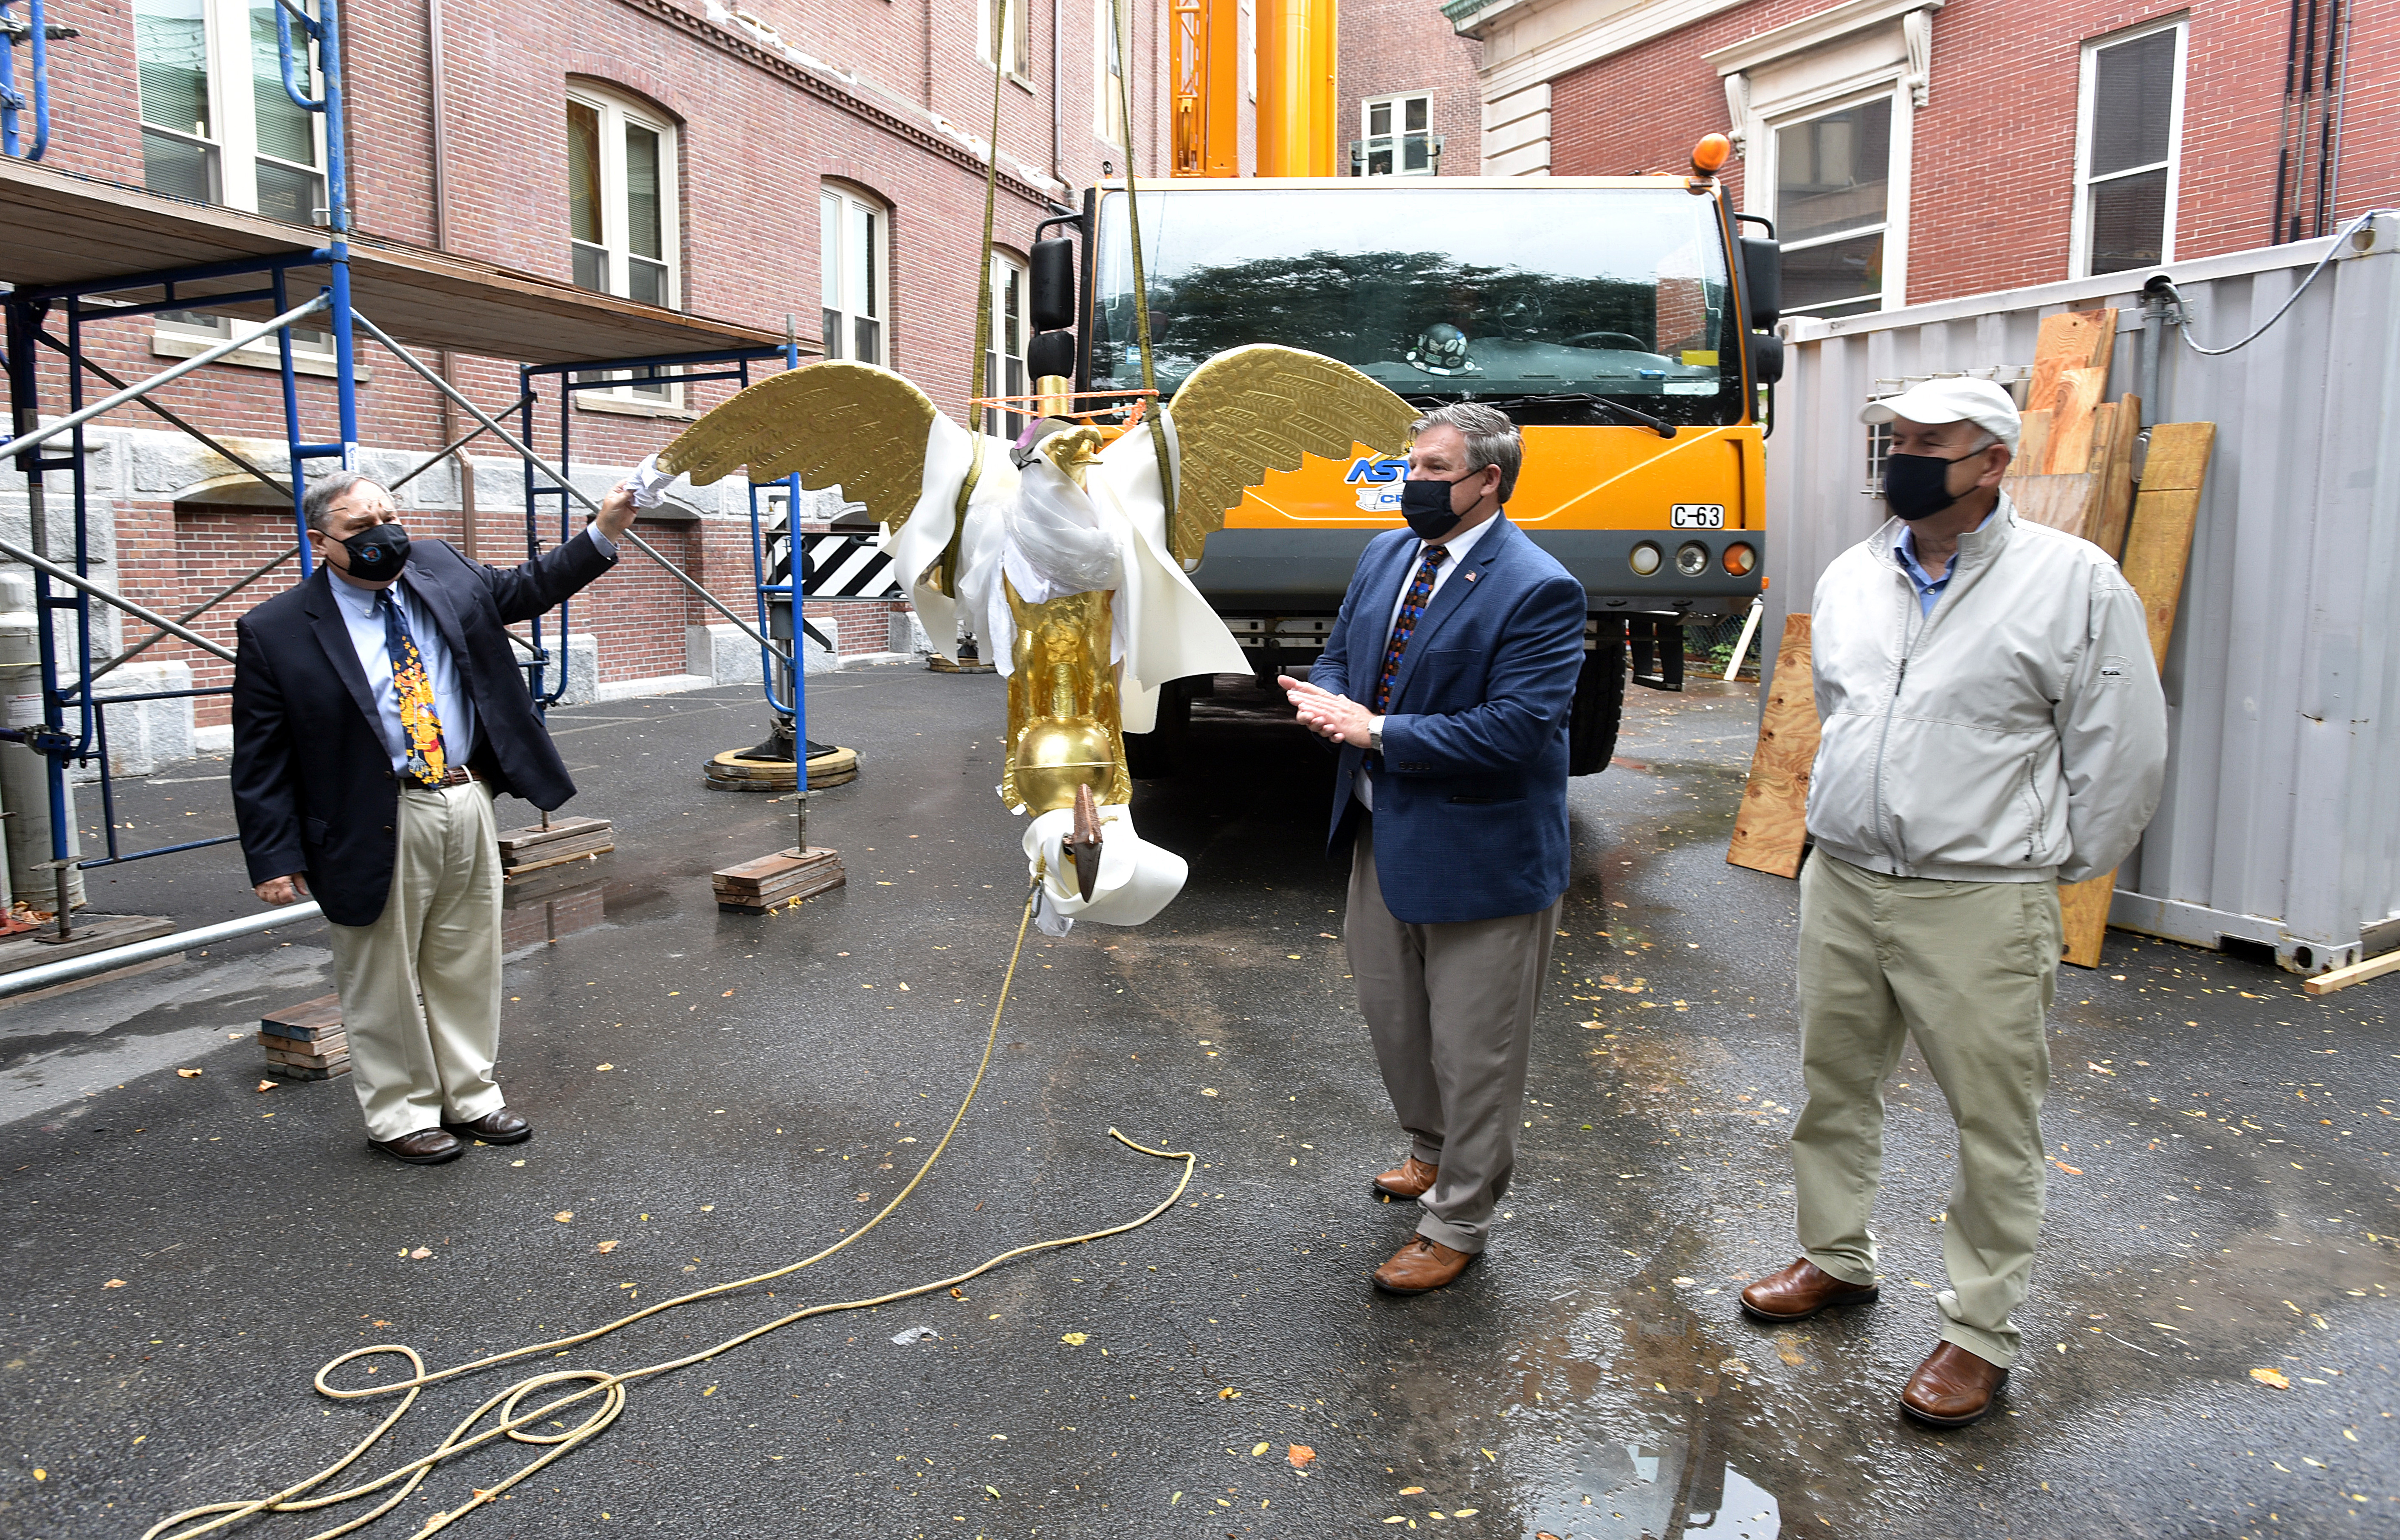 10/6/2020 -Chicopee-  Chicopee Mayor John Vieau speaks next to a replica of  the "Chicopee Eagle Weathervane" before it was placed on top of the City Hall Clock Tower, now undergoing renovations. The original eagle will be on display in the City Hall auditorium once building renovations are complete. On the left is mayoral chief of staff Michael Pise and on the right is city councilor George Balakier.   (Don Treeger / The Republican)